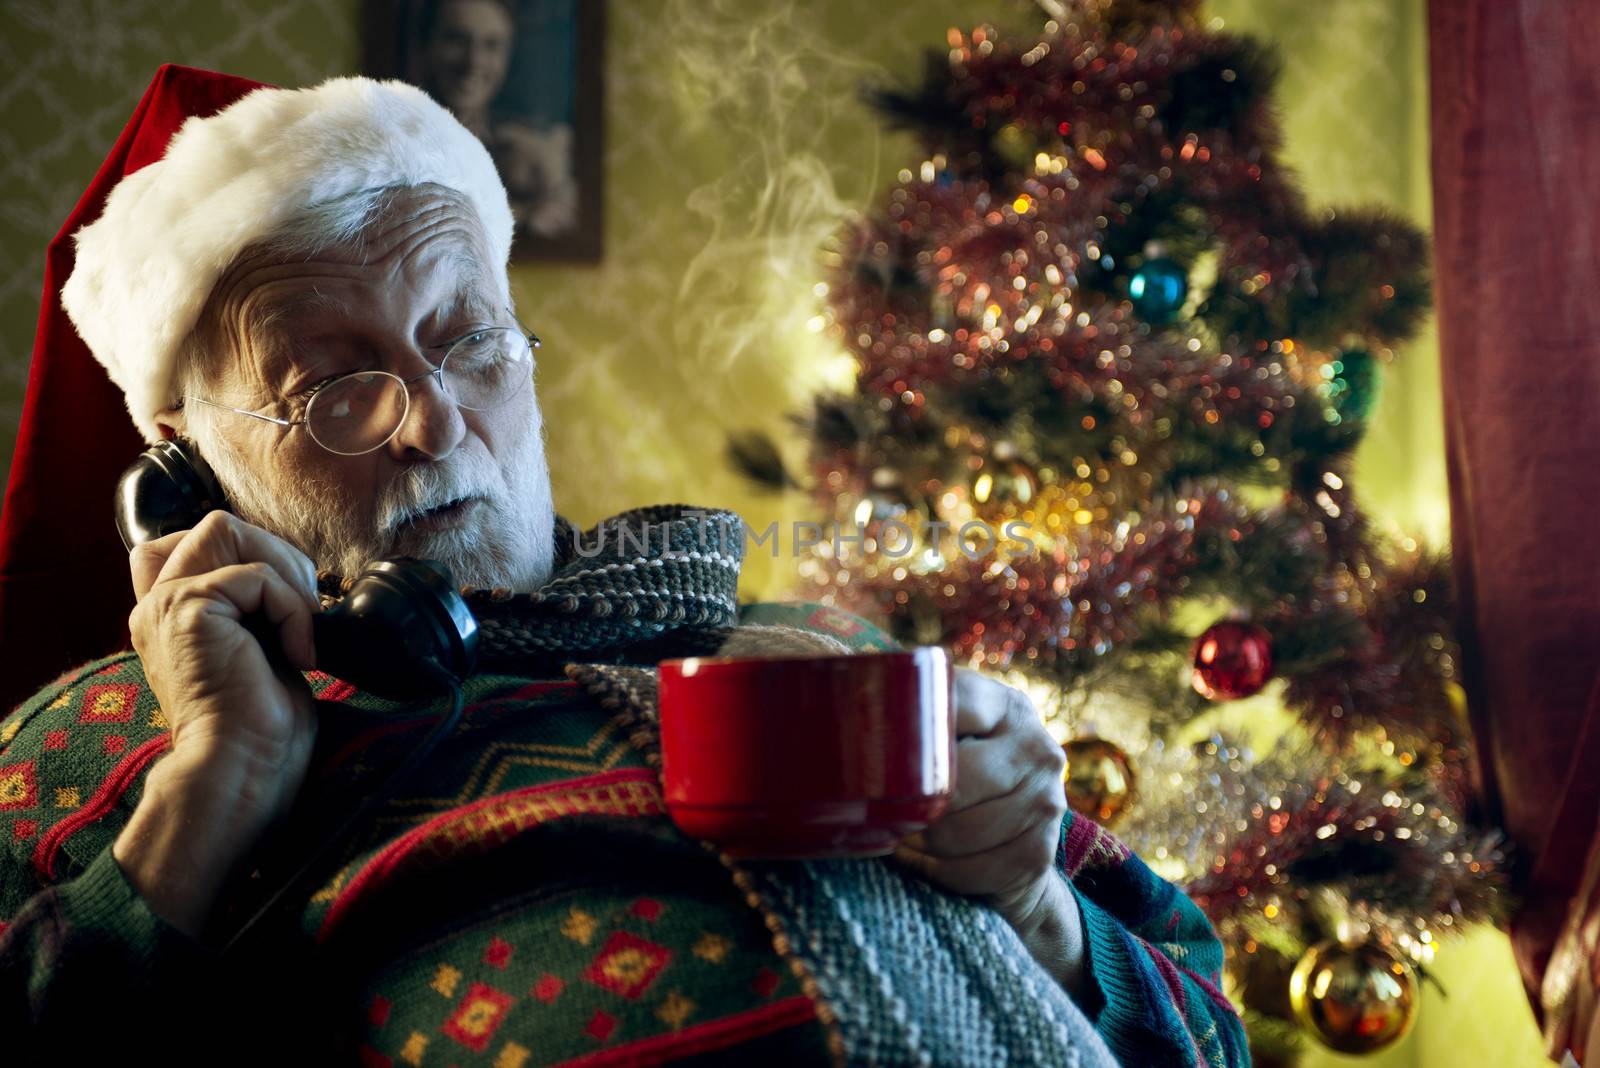 Pictures of Santa Claus relaxing at home and talking on phone